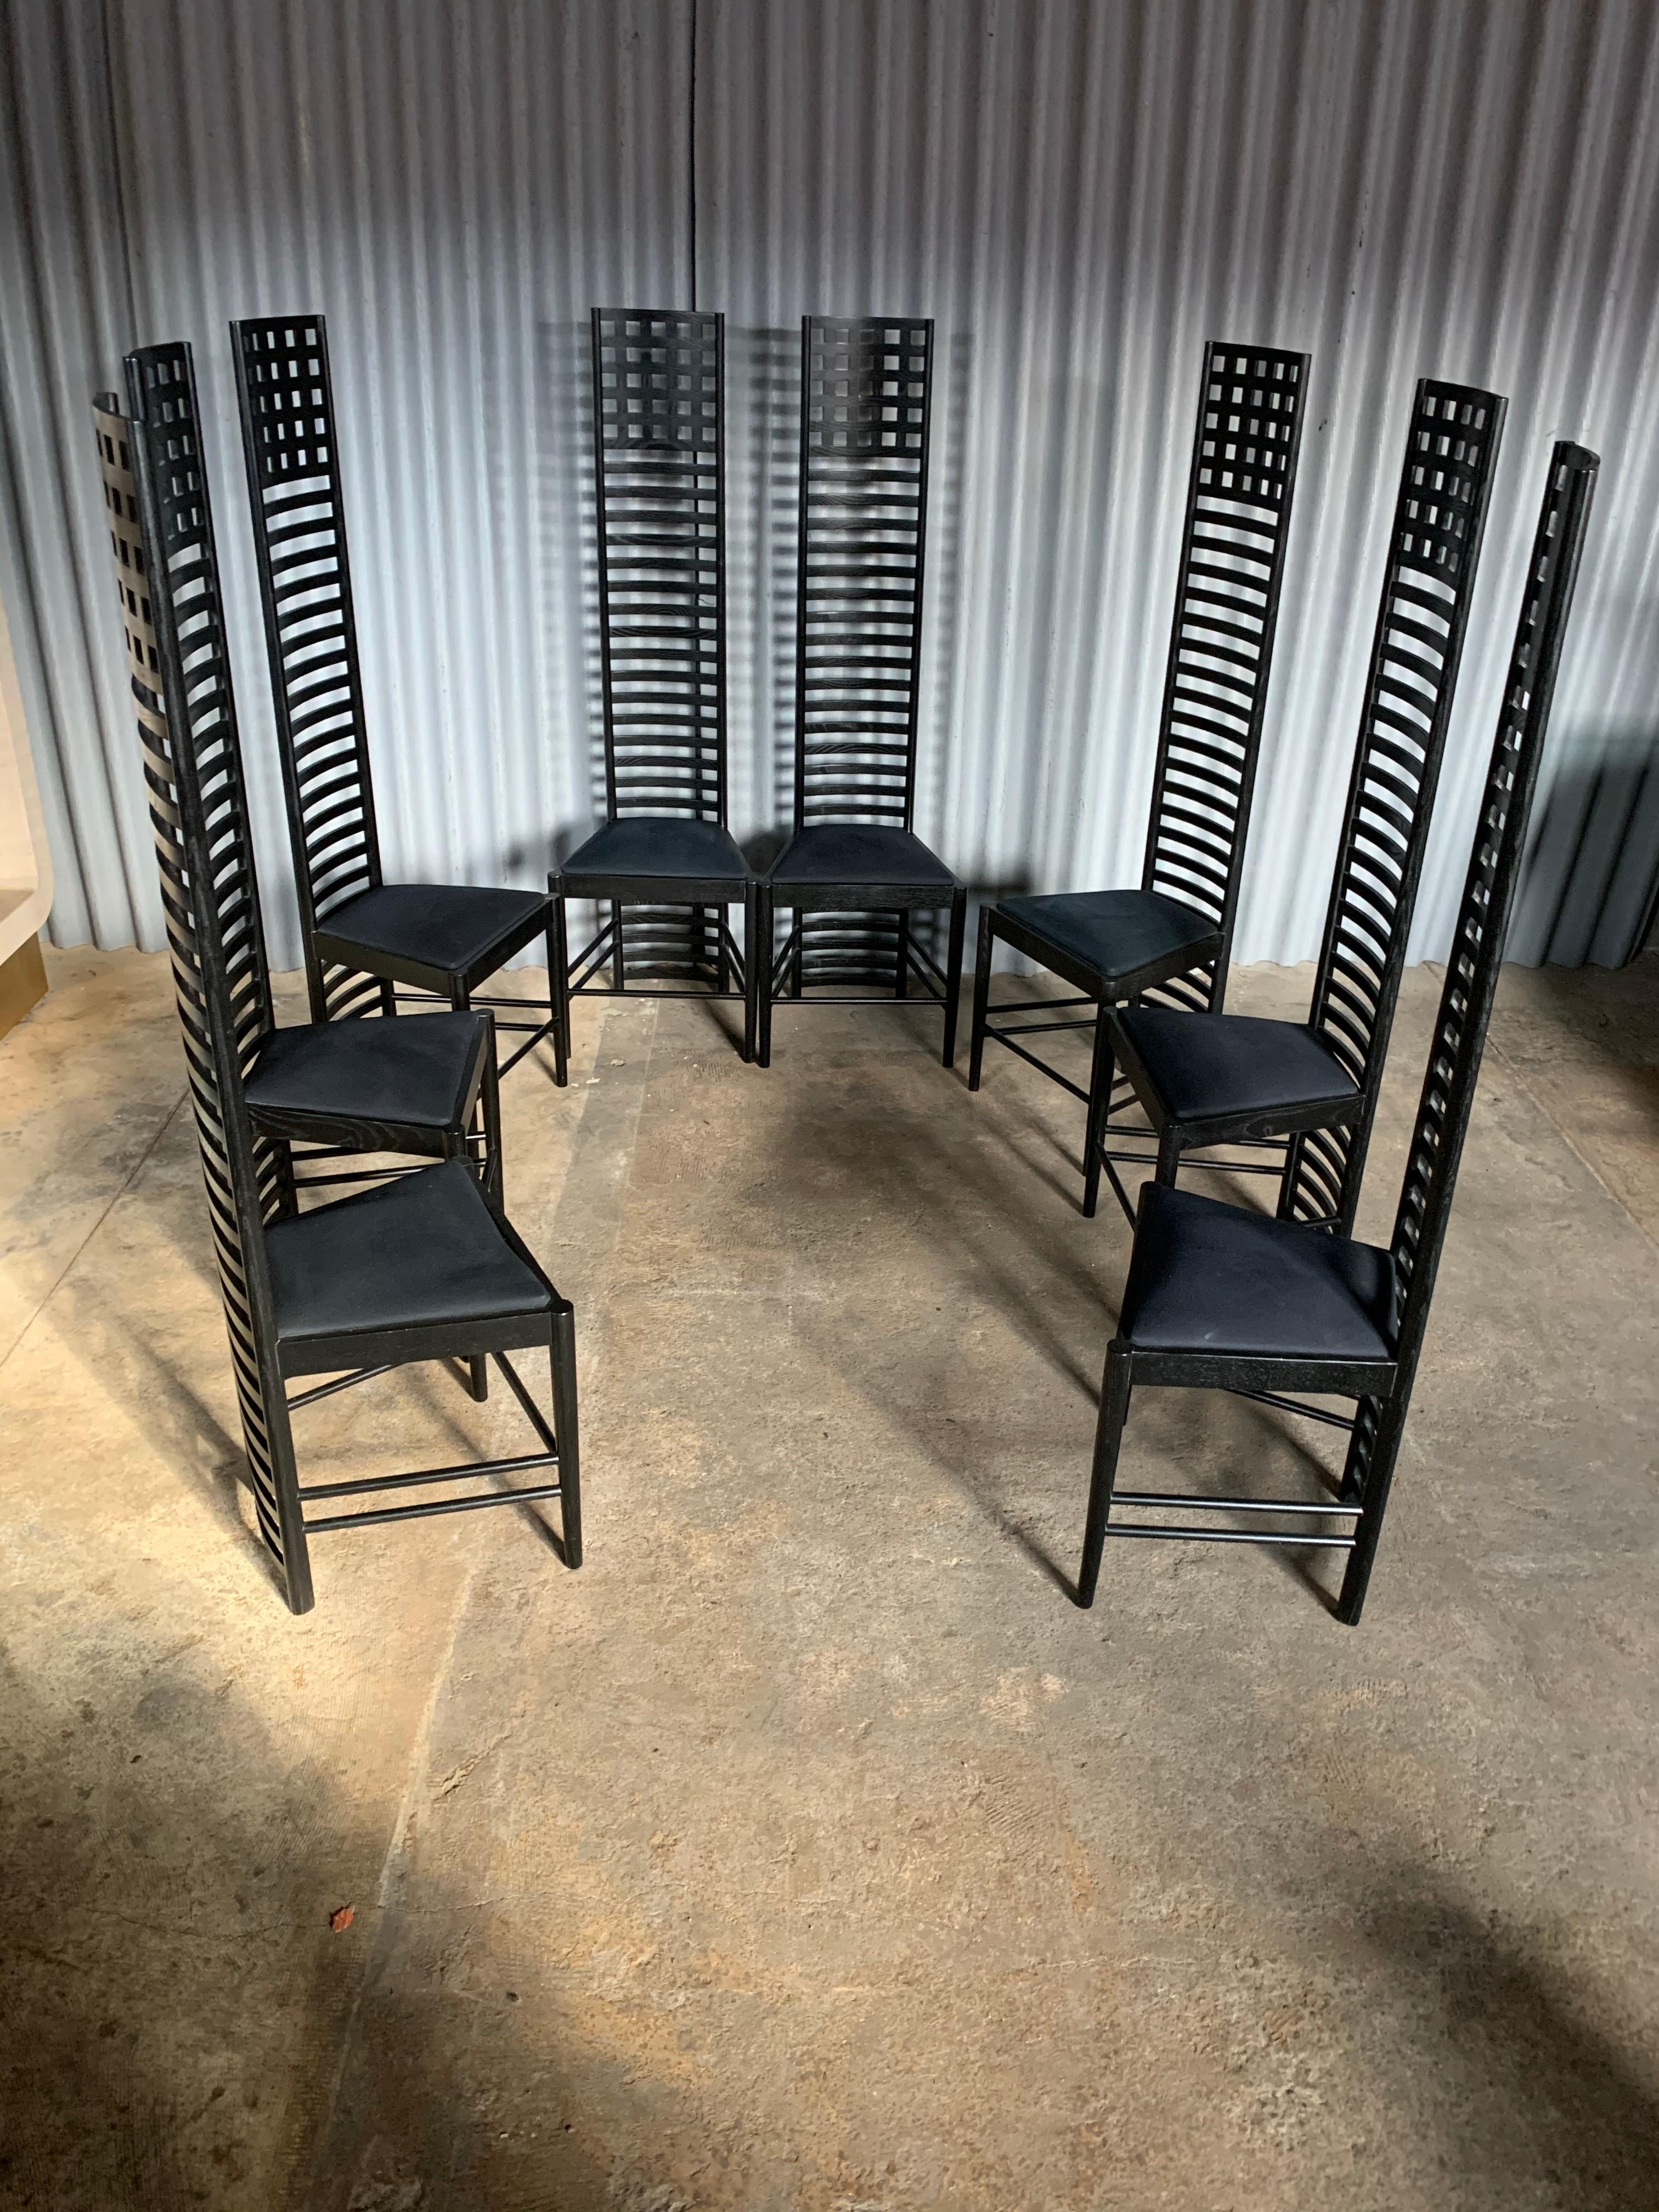 Arts and Crafts Mid-Century Modern Chairs after Charles Rennie Mackintosh 292 Hill House